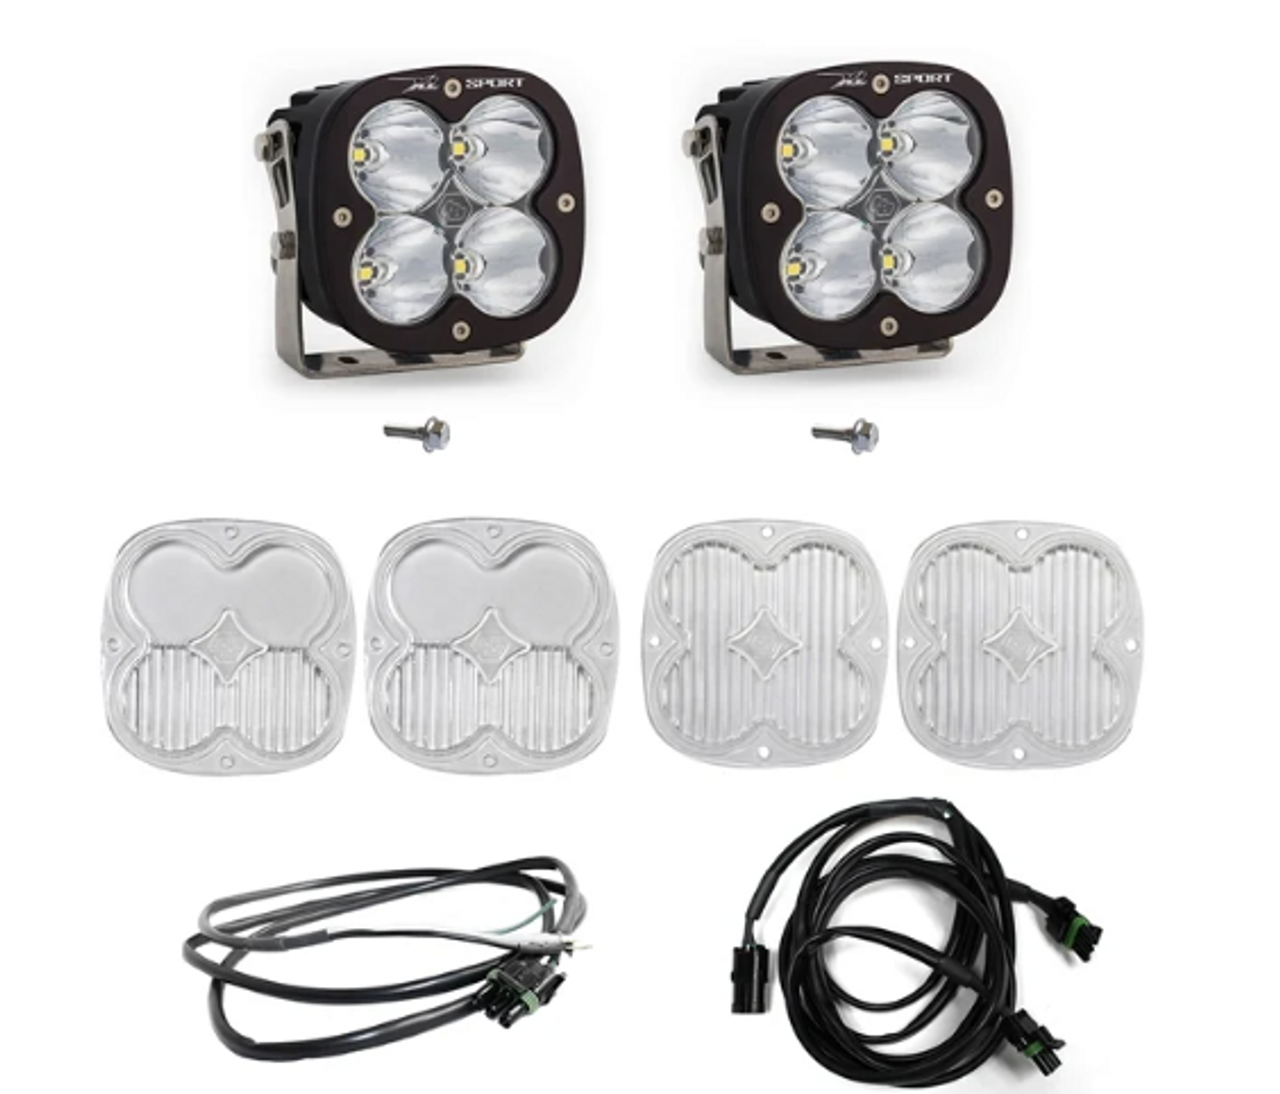 Baja Designs 447753UP XL Sport Series A-Pillar Light Kit with Upfitter for Ford Bronco 2021+